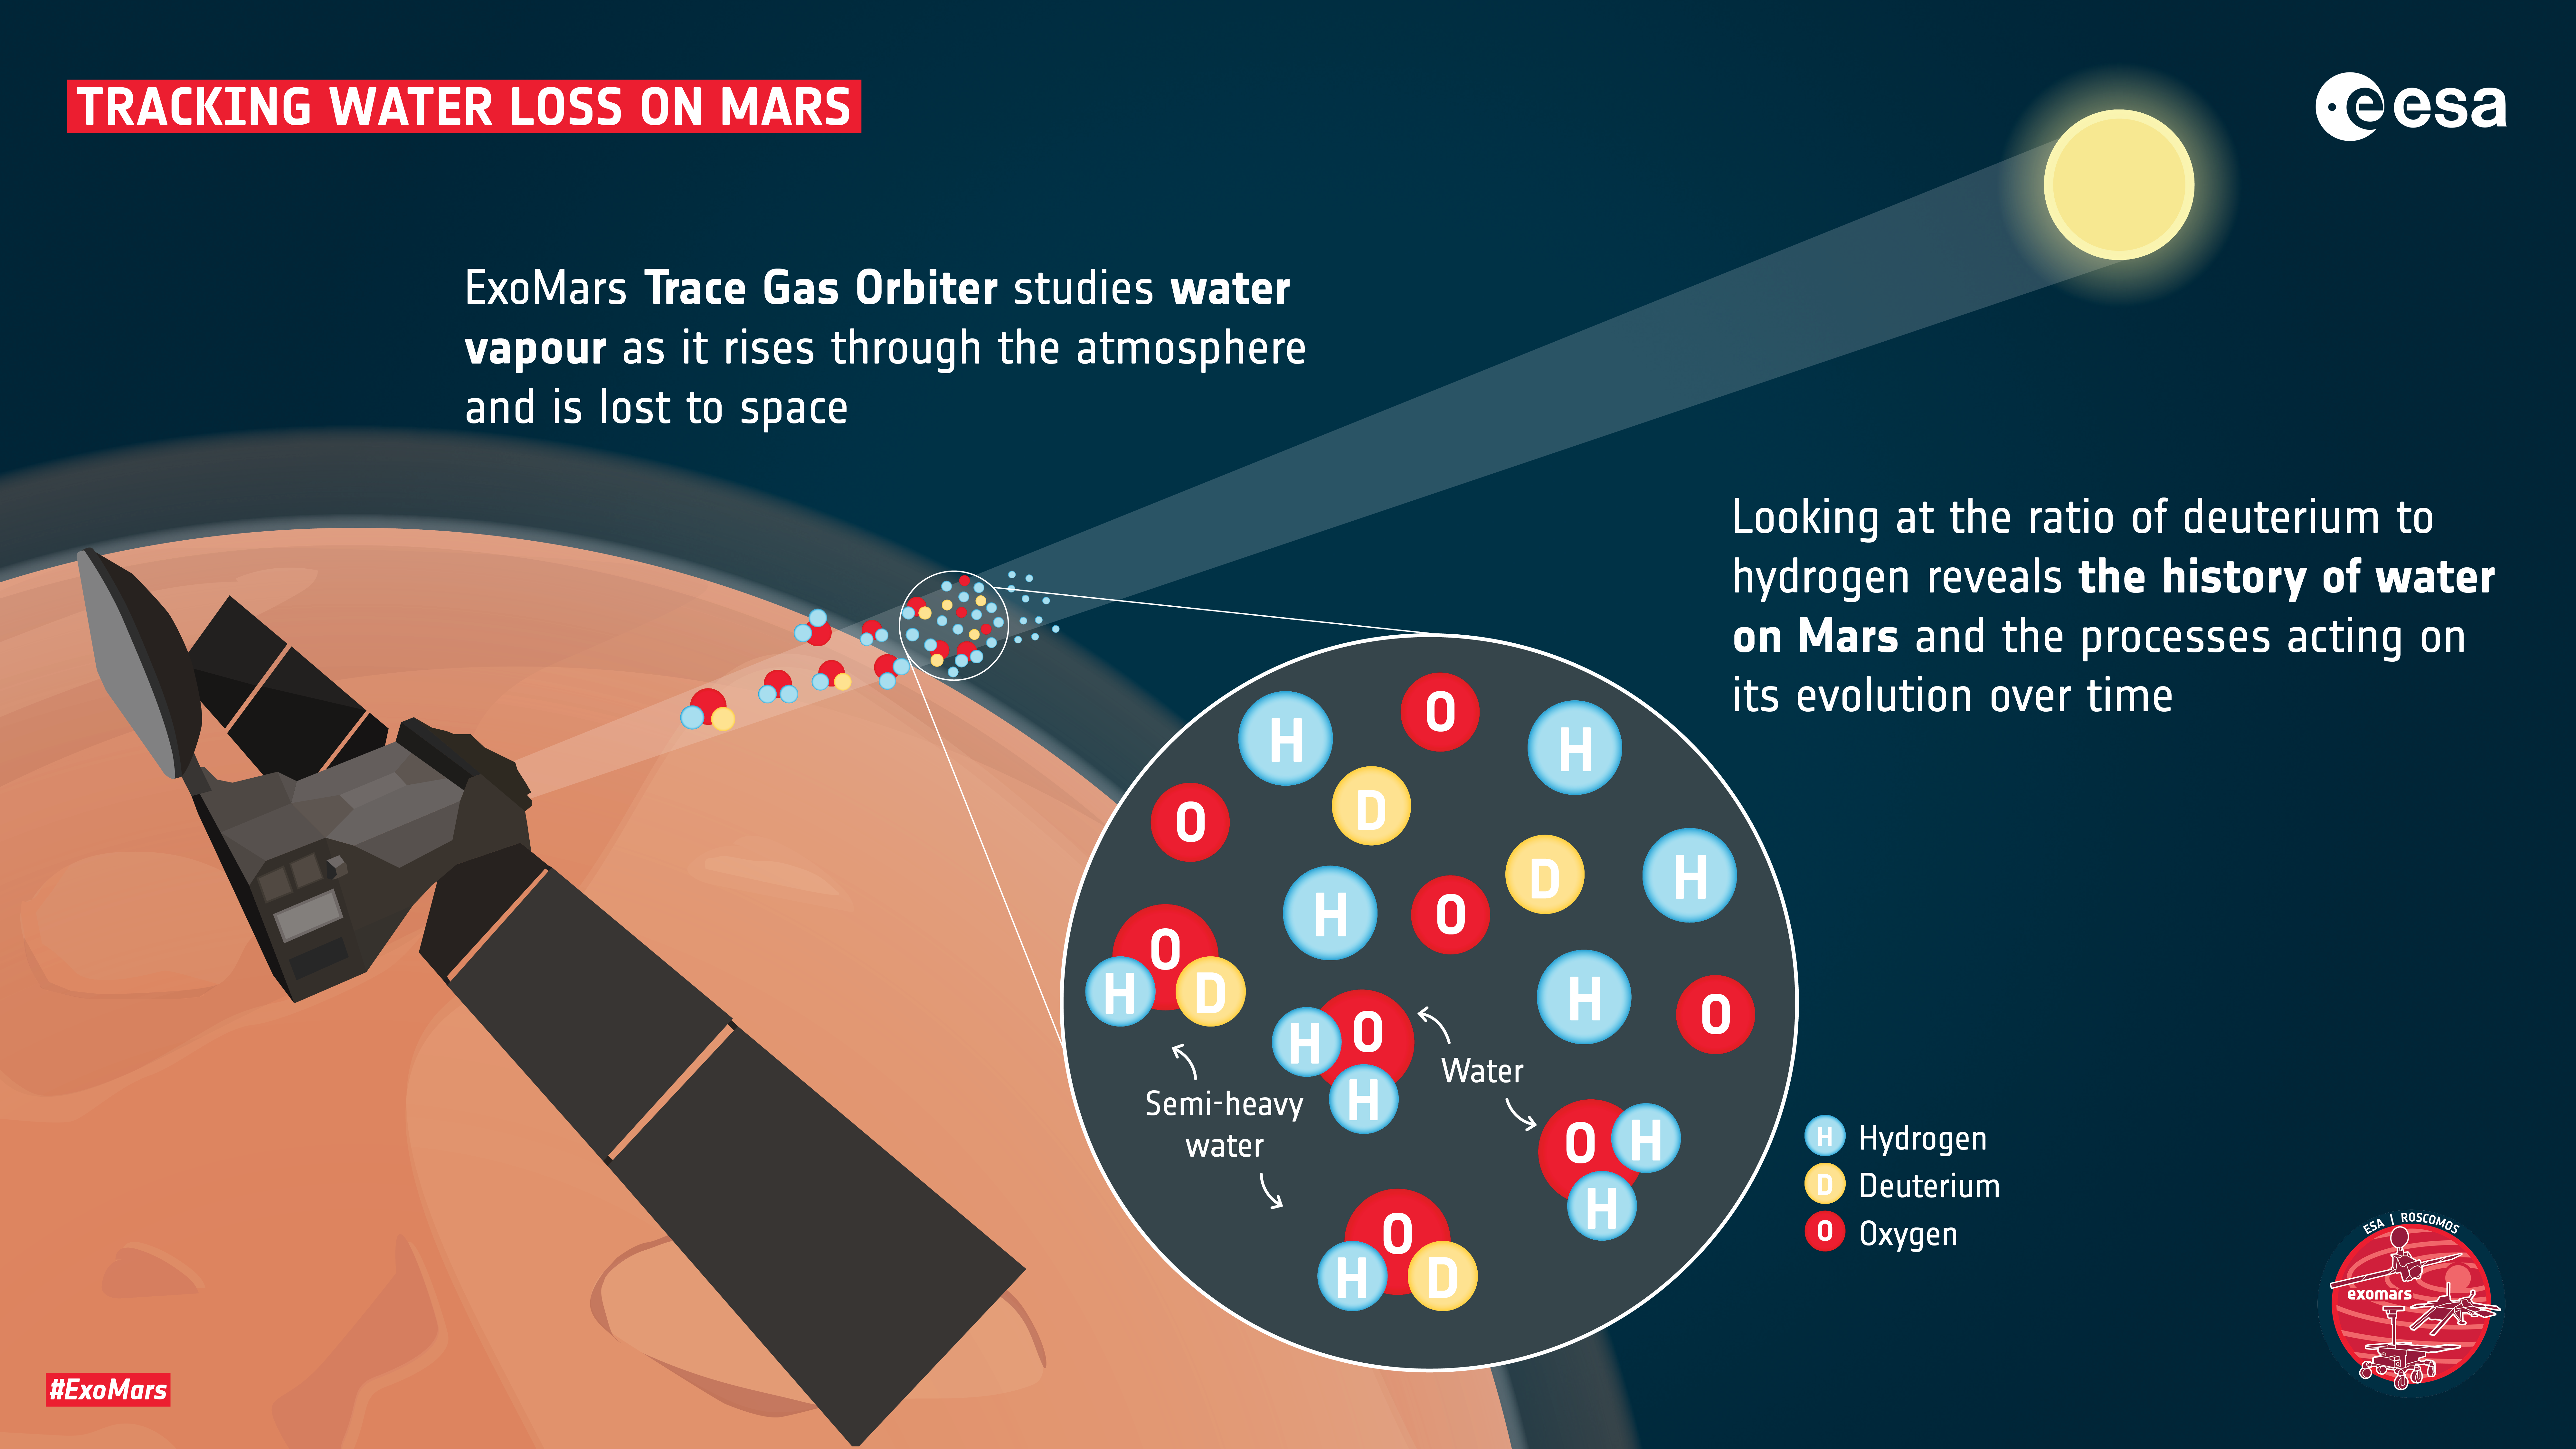 Tracking water loss on Mars